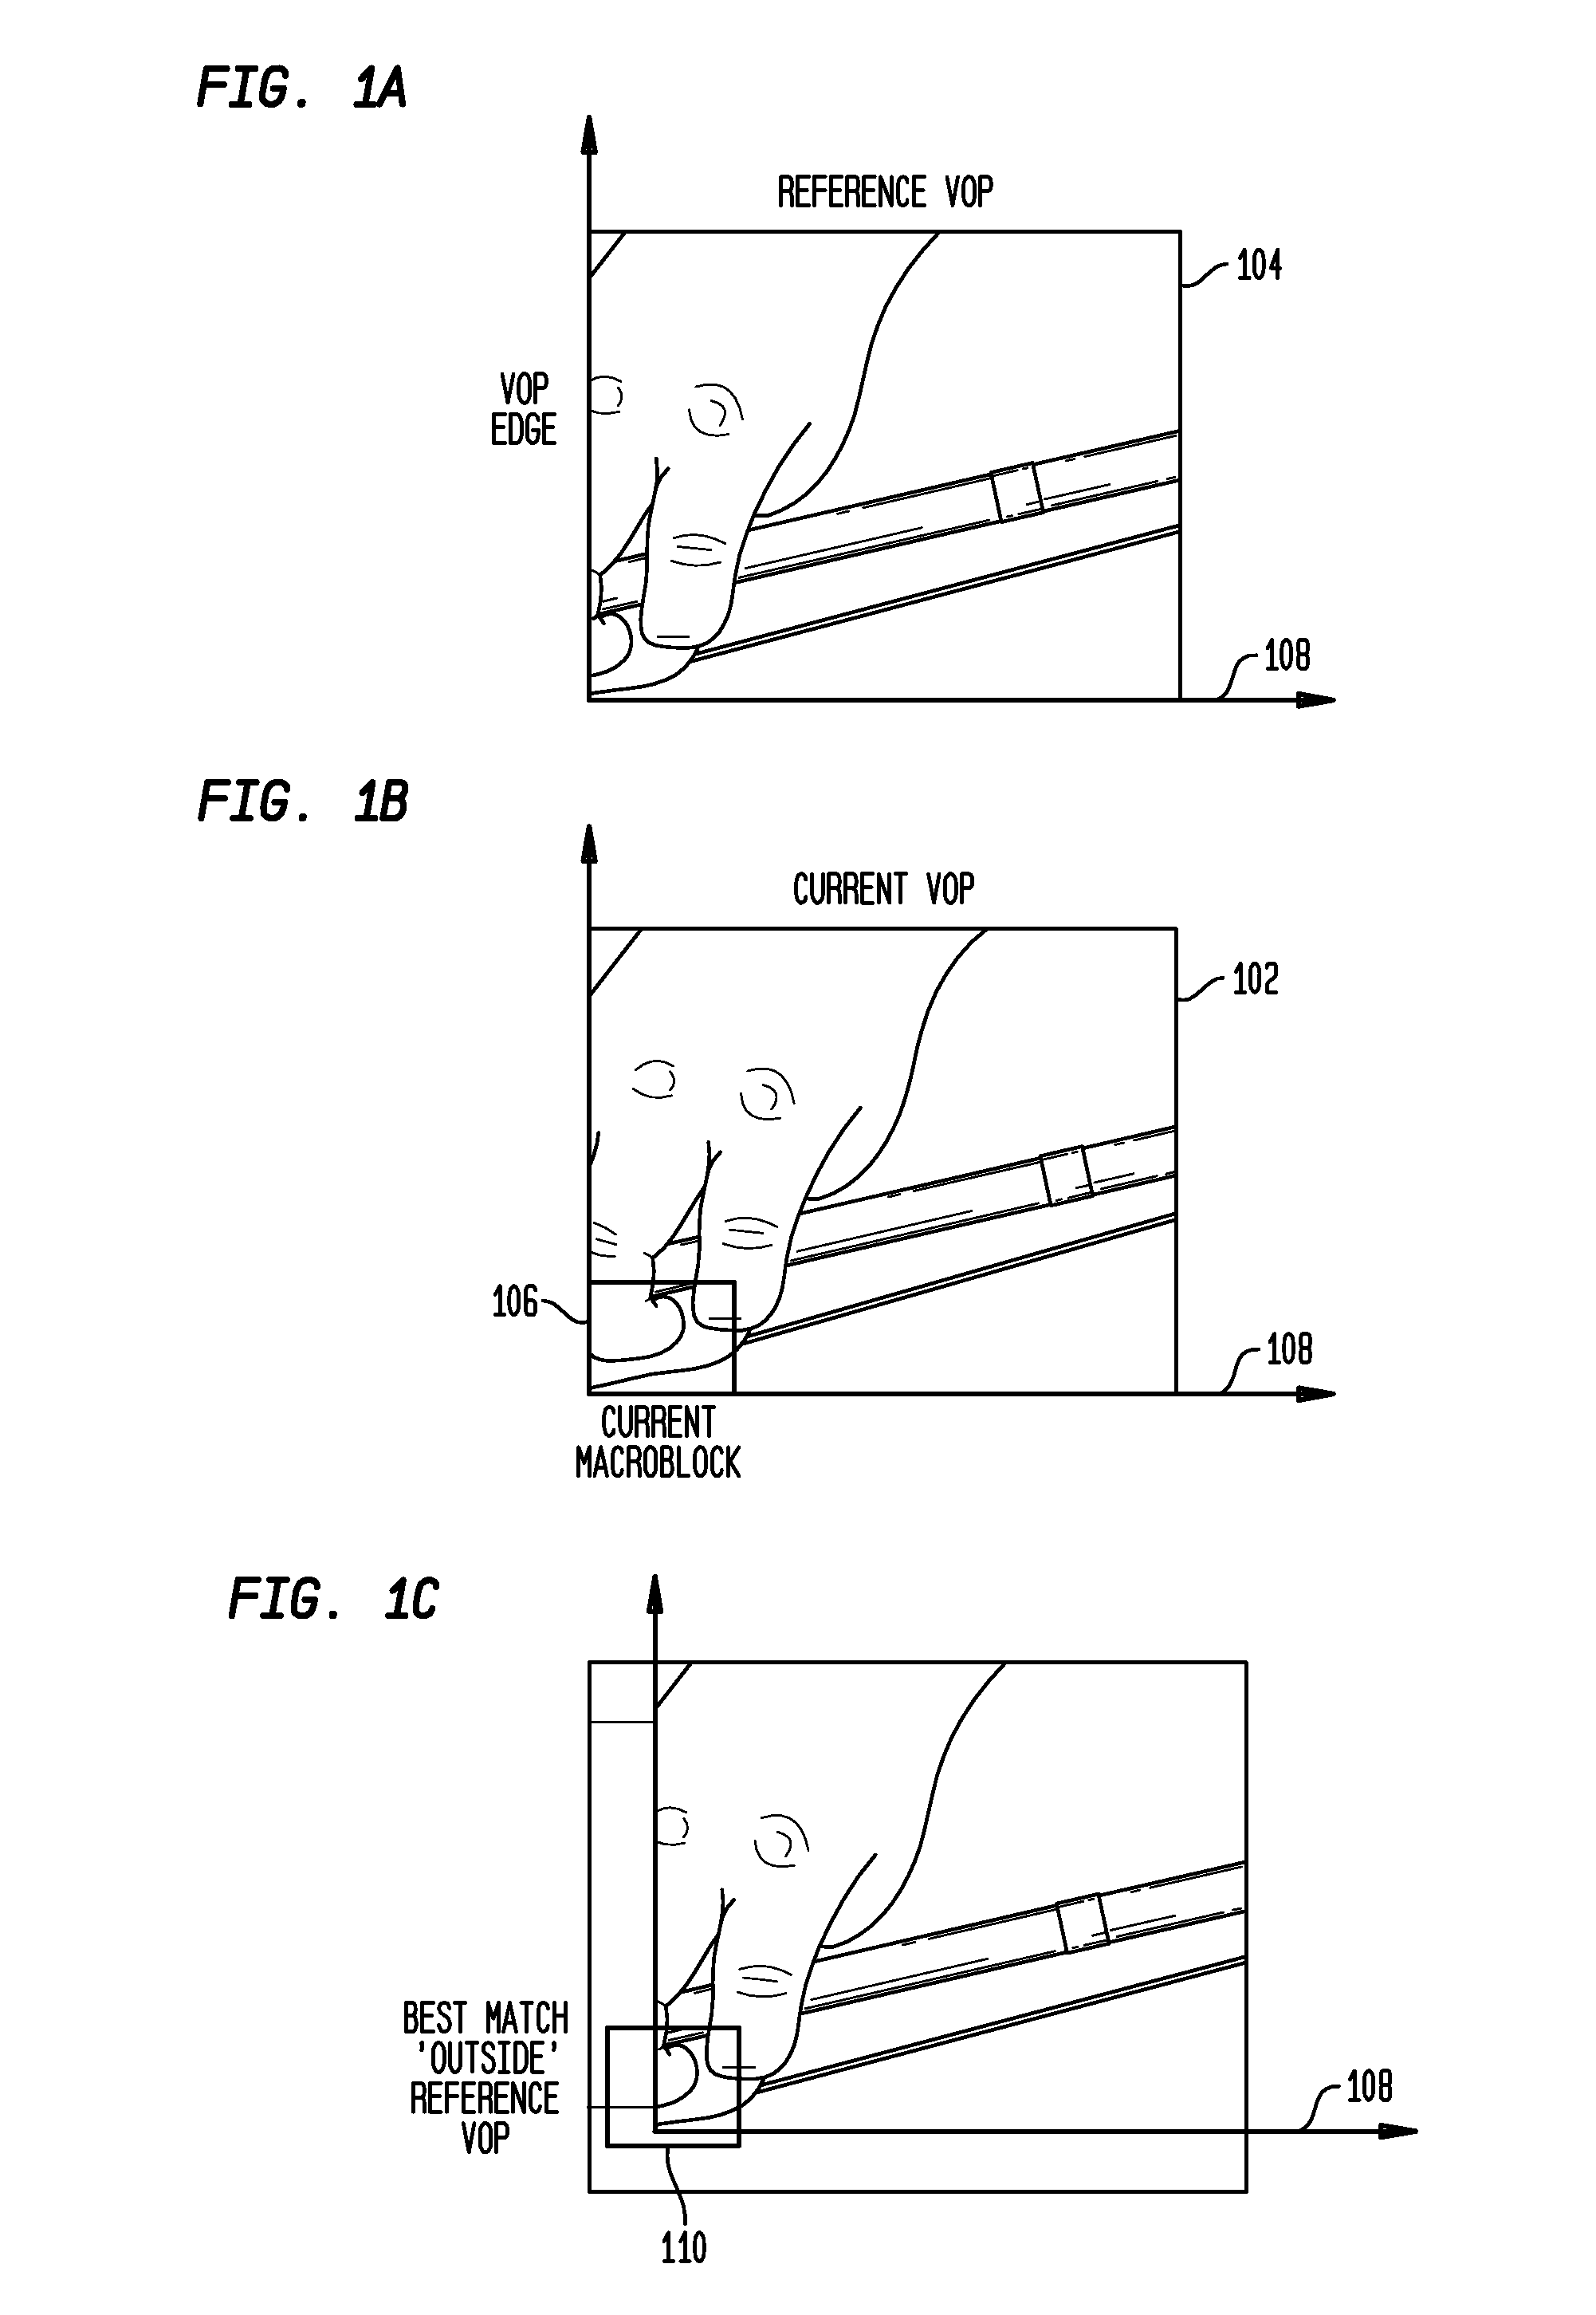 Direct Memory Access With On-The-Fly Generation of Frame Information For Unrestricted Motion Vectors